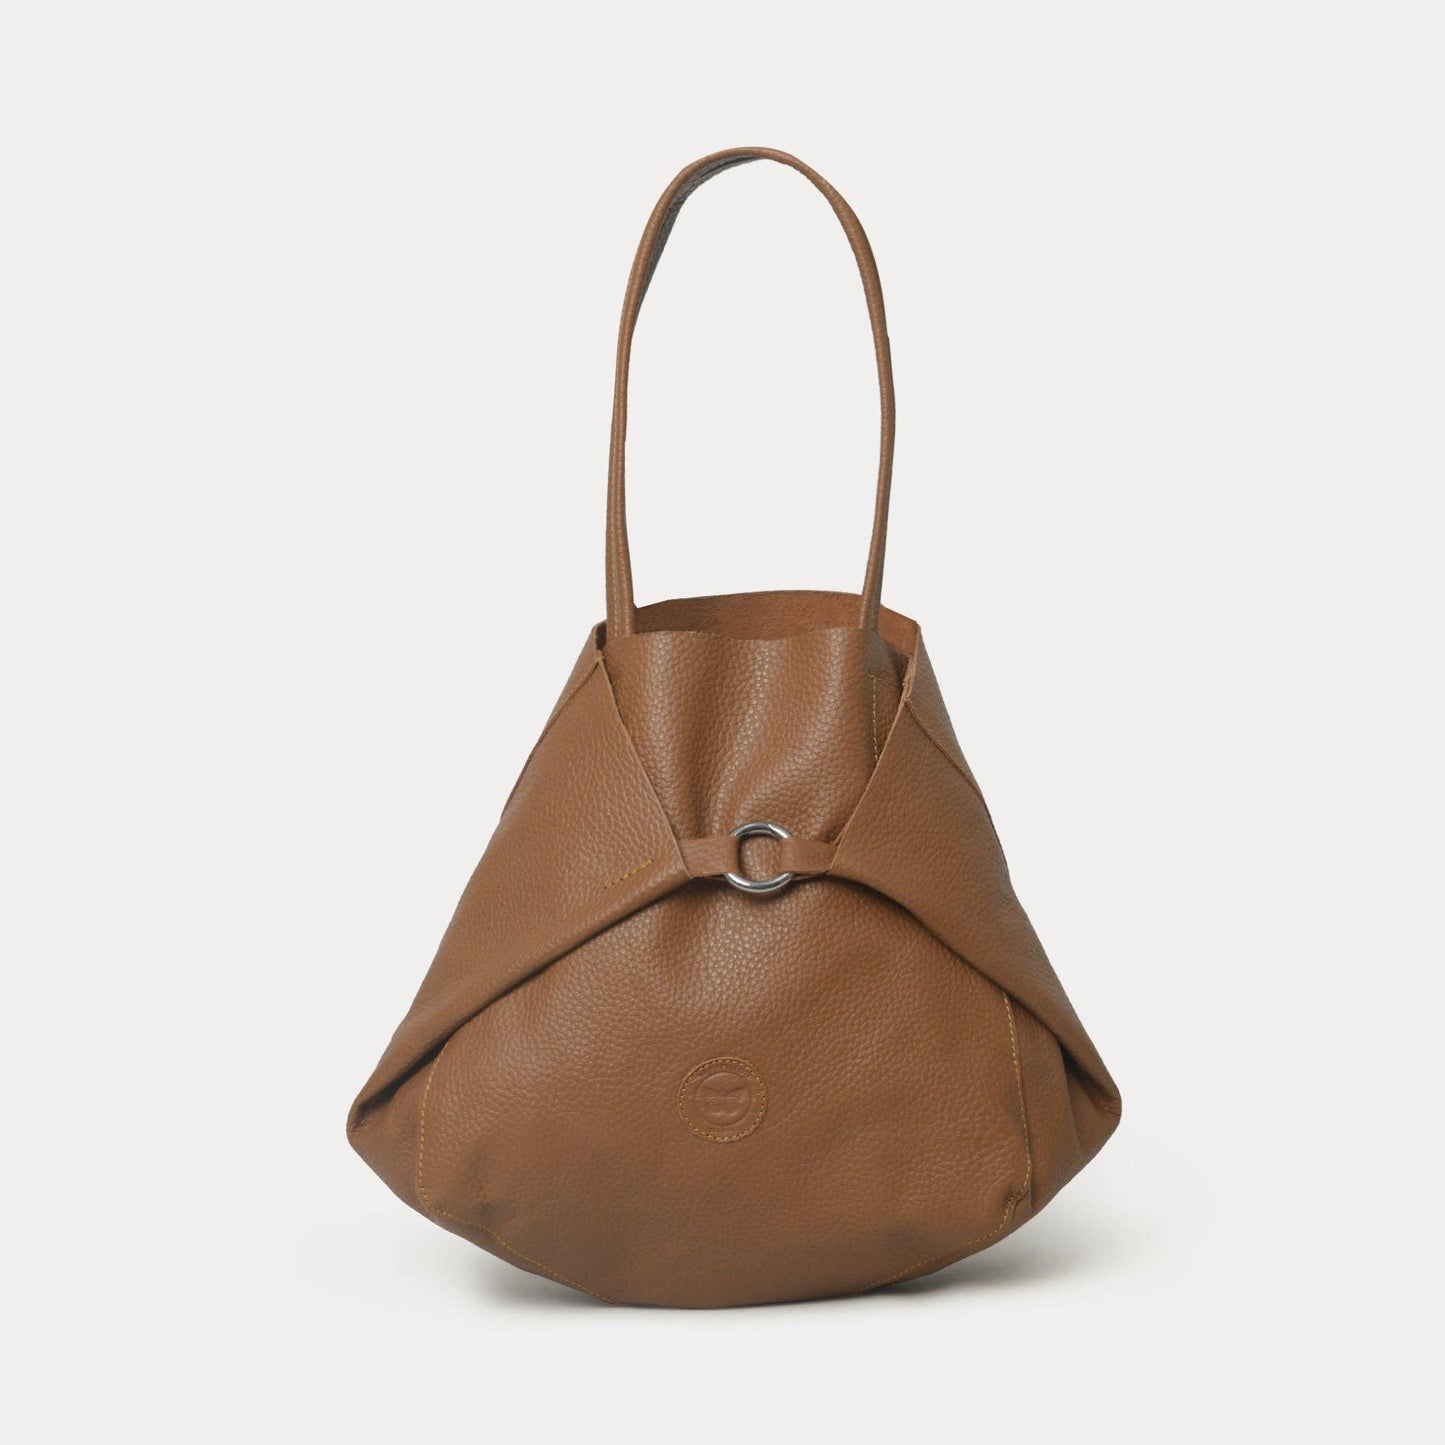 Save 40%! - Modena Leather Bag in Light Brown from Le Papillon